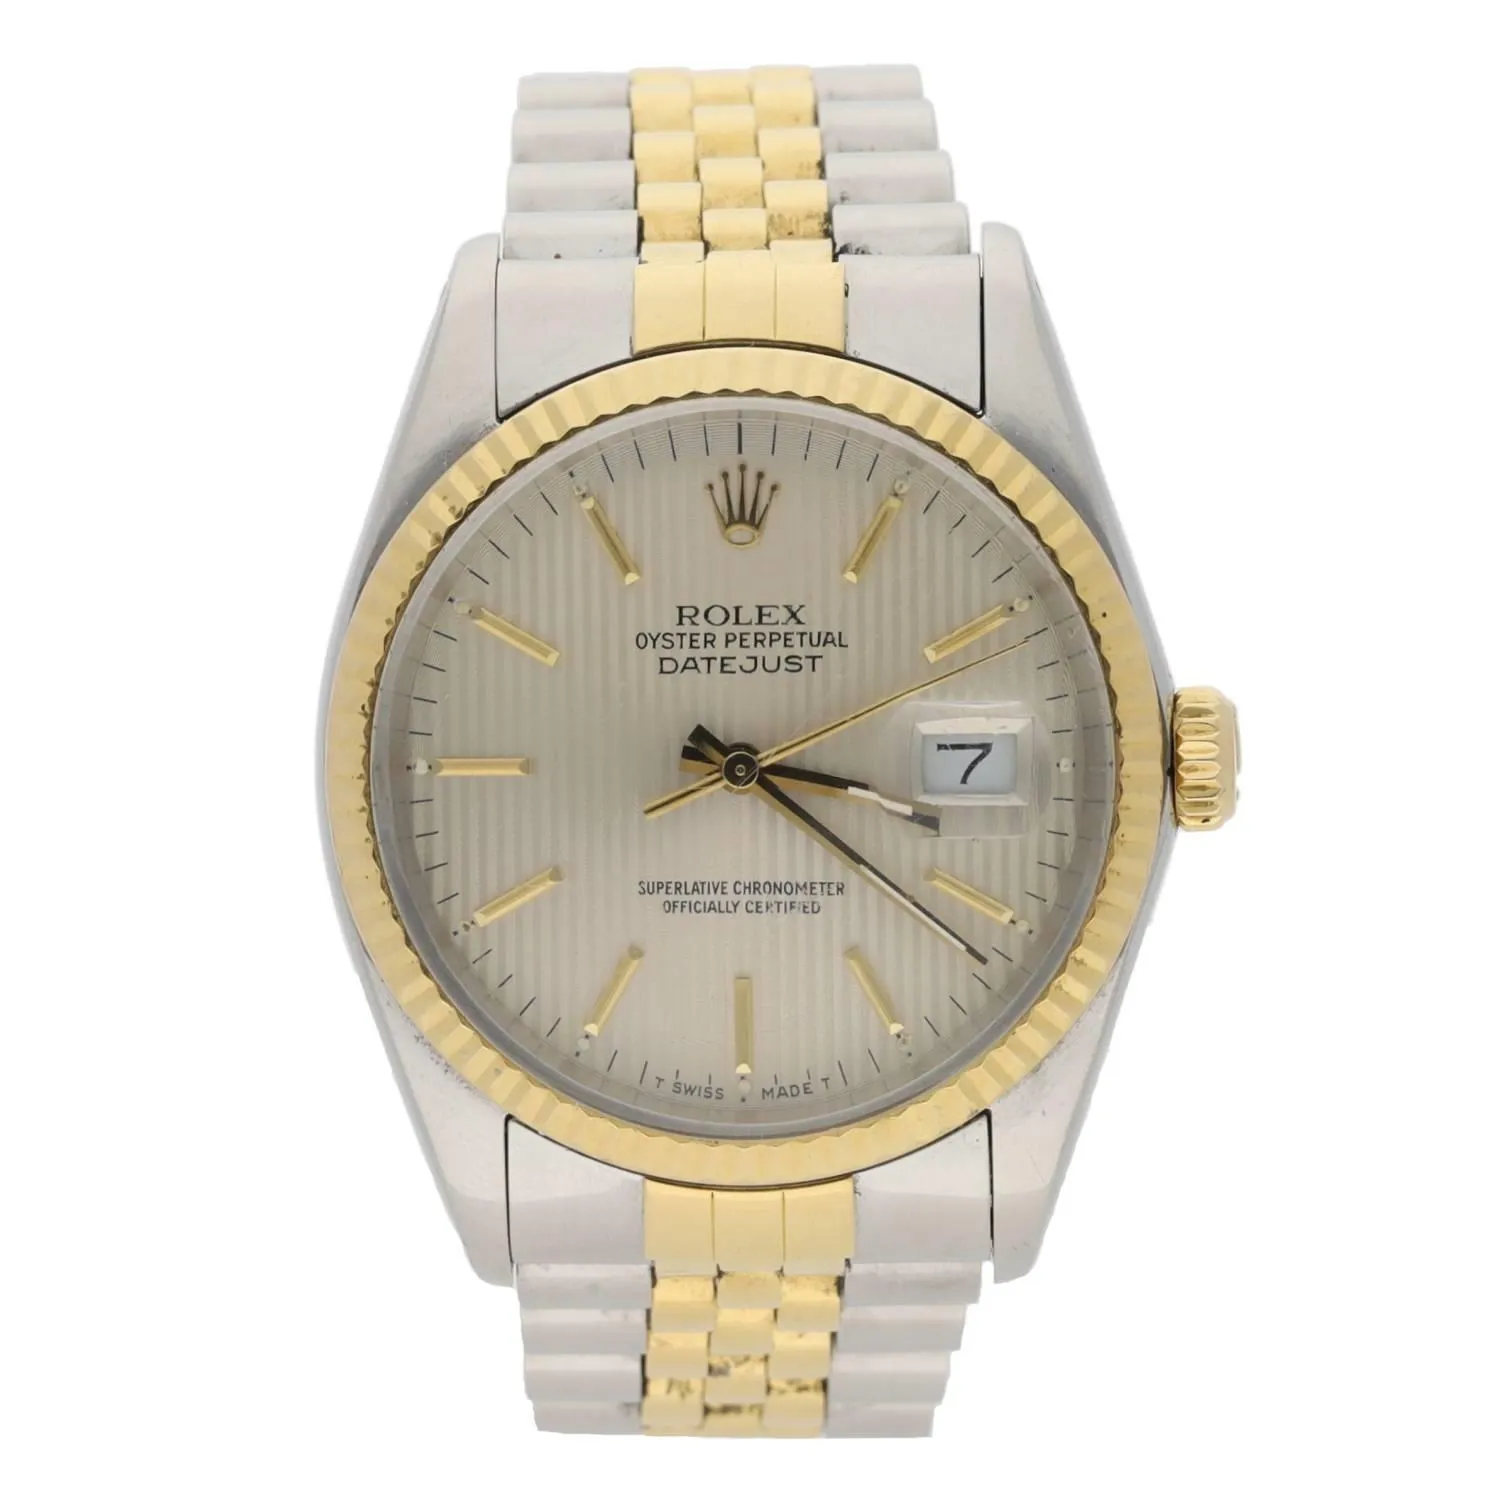 Rolex Oyster Perpetual "Datejust" 16013 36mm Gold and stainless steel Champagne